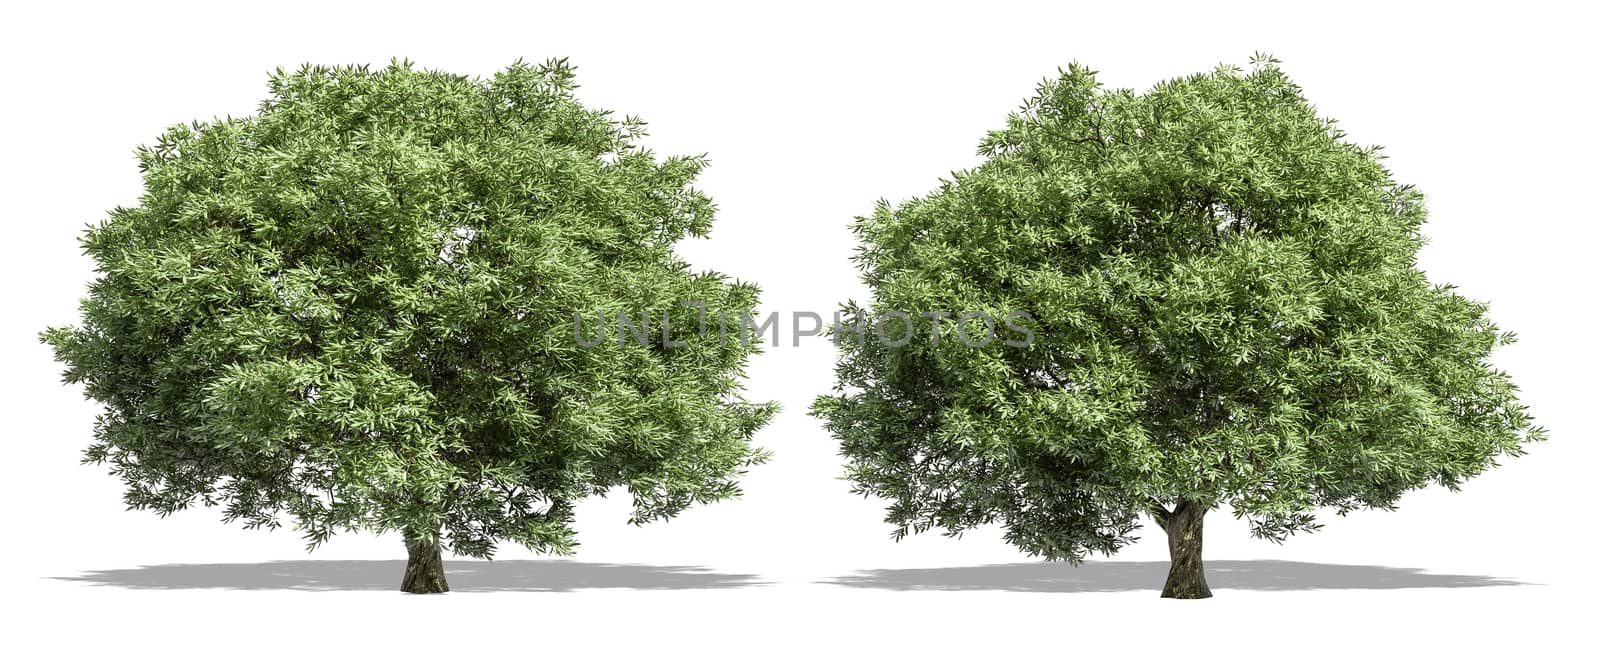 Beautiful Salix fragilis tree isolated and cutting on a white background with clipping path. by anotestocker